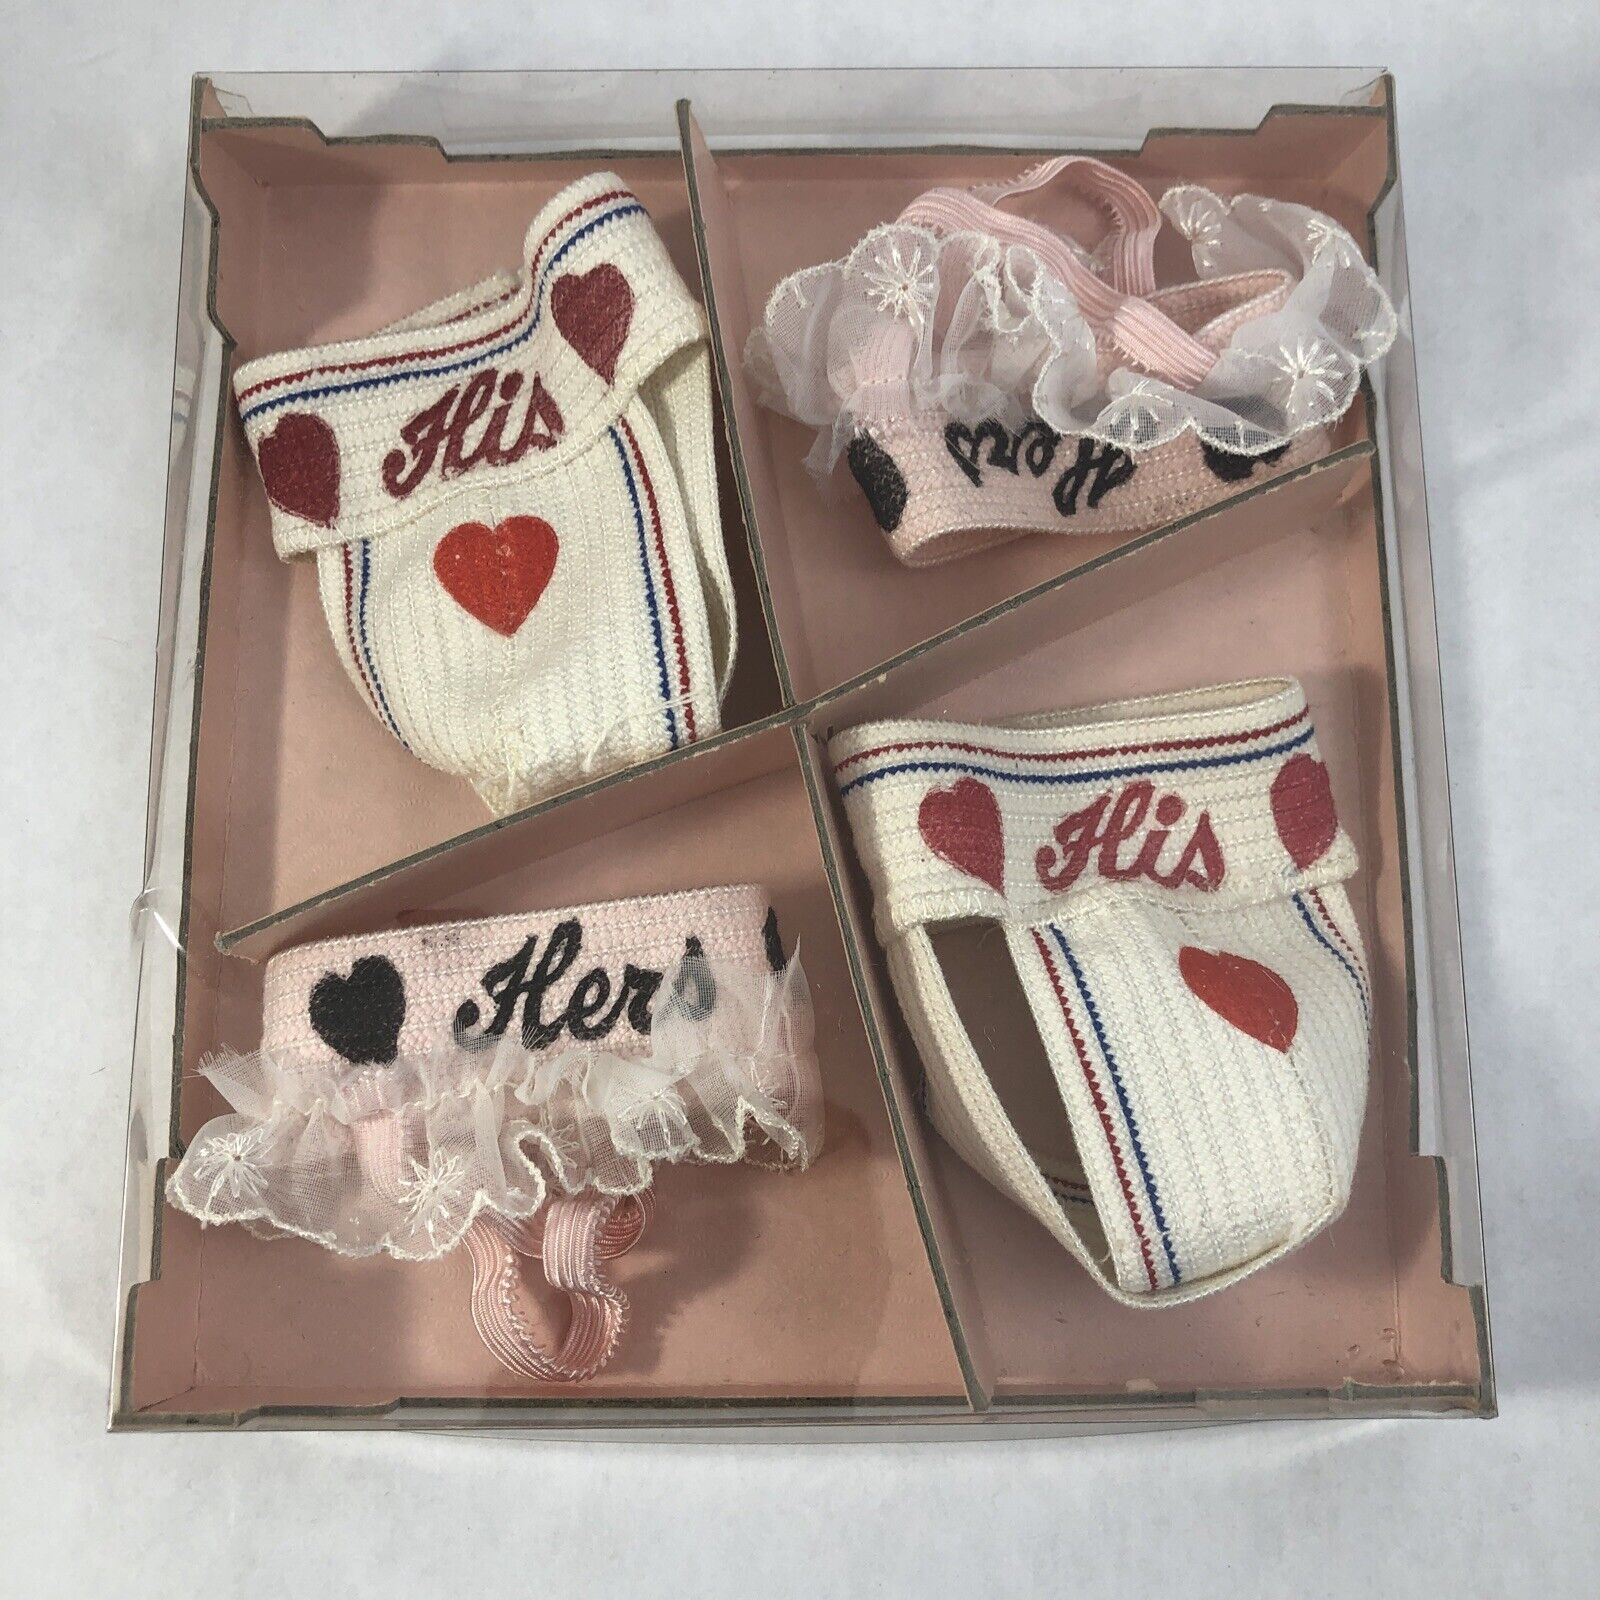 His Hers Underwear Cup Cozies Newlywed Gag Gift Risque Humor Set 4 Vintage NOS